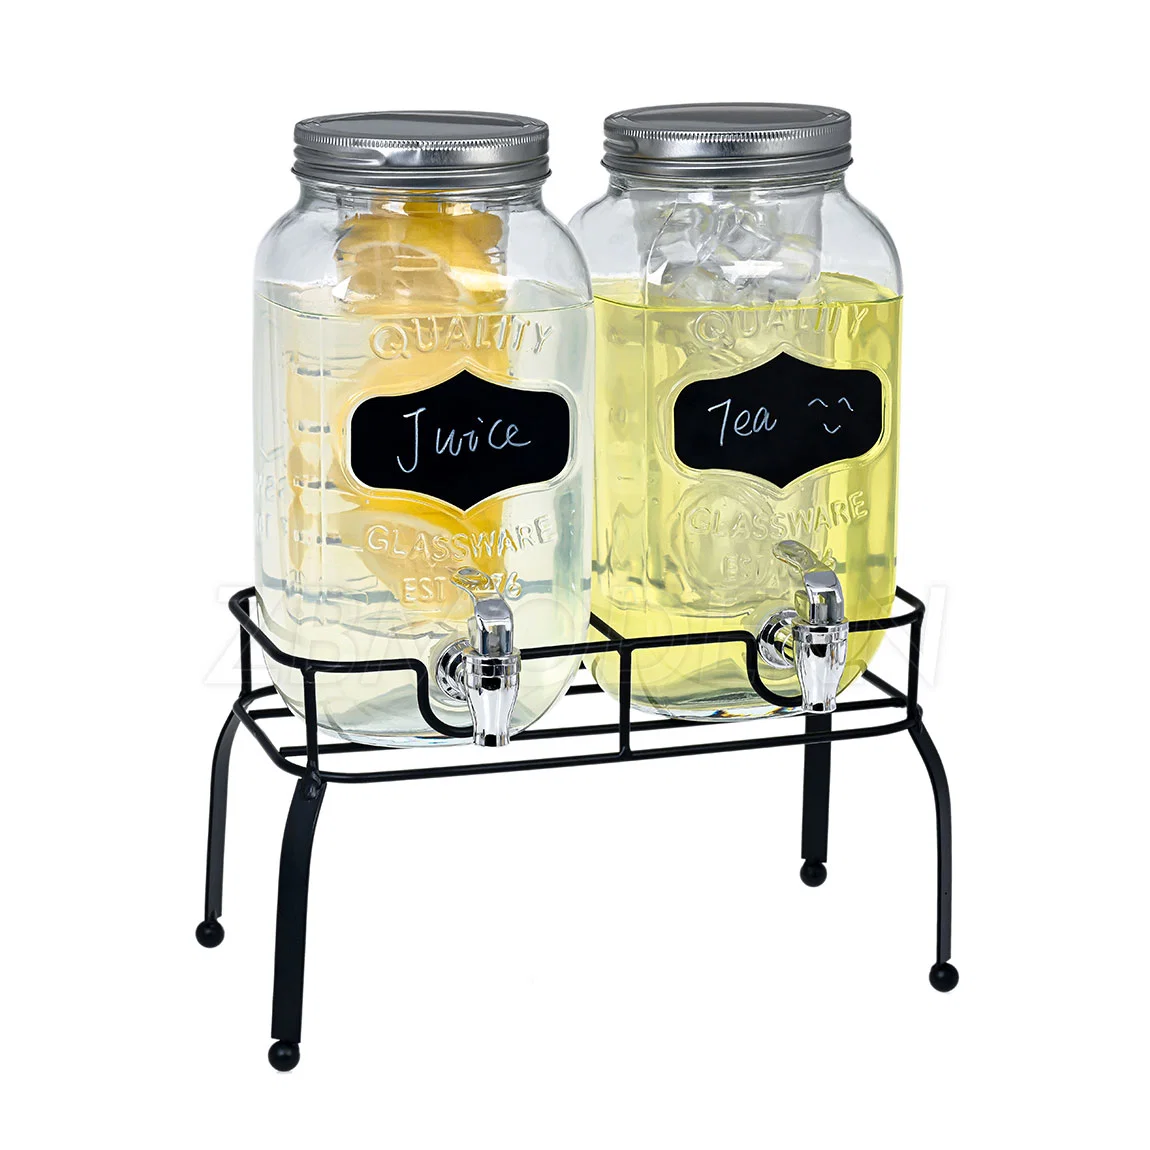 Set of 2 1 Gallon Clear Glass Mason Jar Big Volume Juice Glass Drink Beverage Dispenser with Tap and Metal Stainless Stand